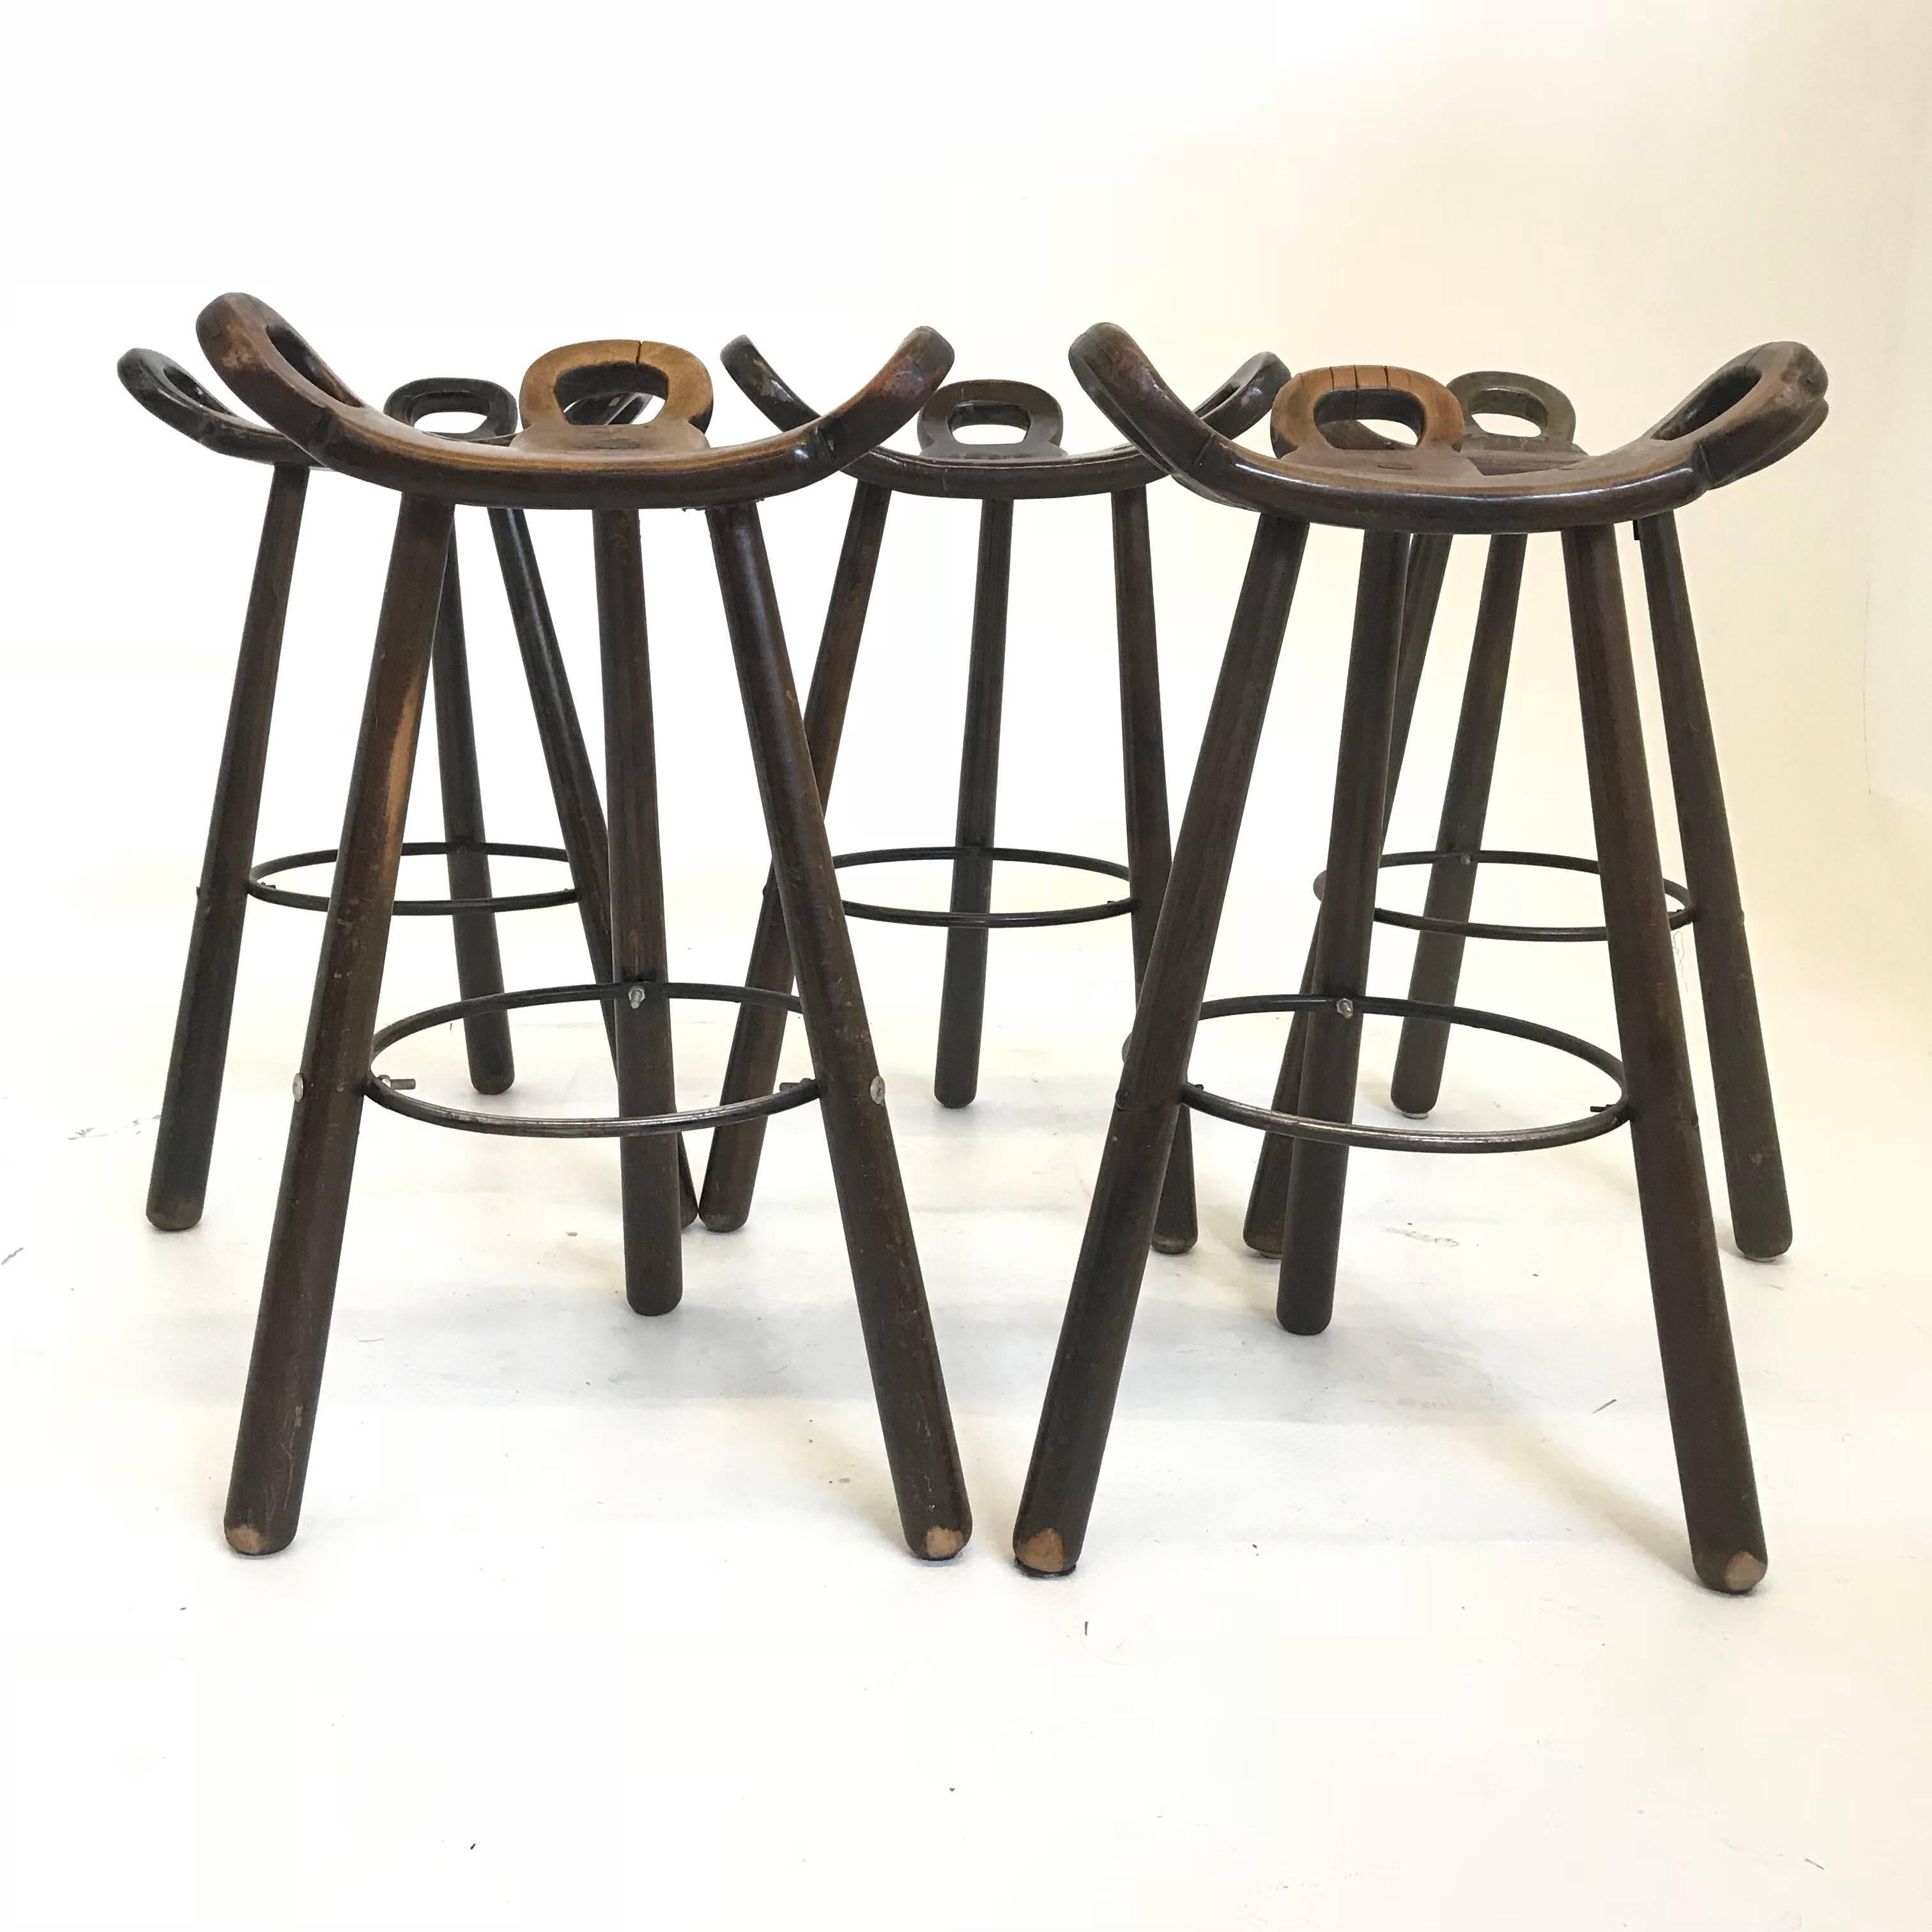 Brutalist Barstool Spanish Chair Marbella Set of Five In Fair Condition For Sale In The Hague, NL